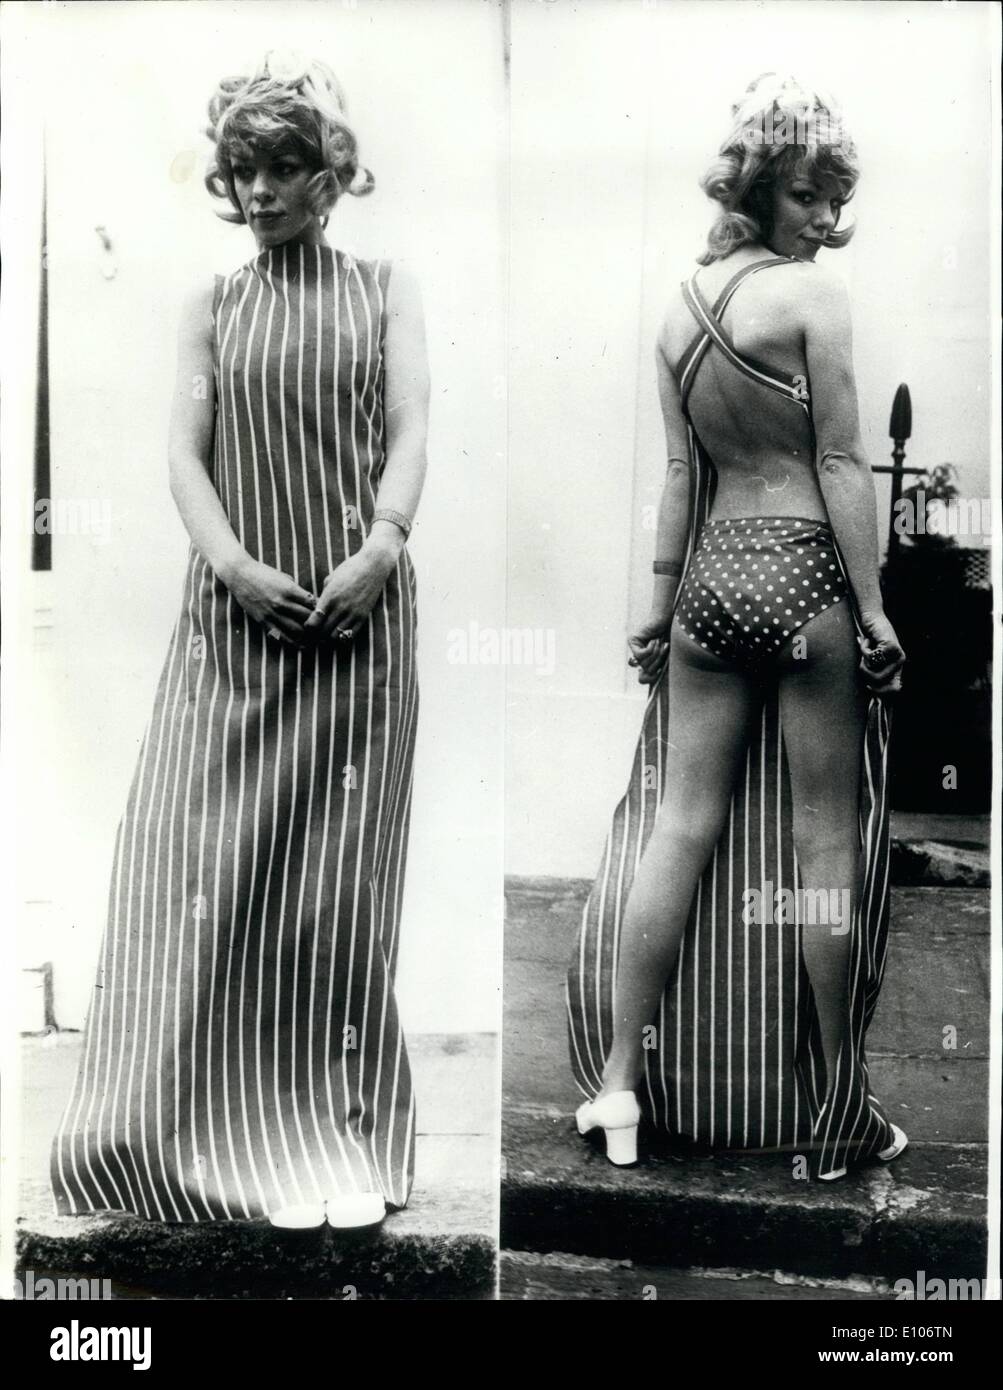 Feb. 02, 1970 - Spring Fashion Show. Photo Shows Model Jill Eaton wearing 'Hostess 70' a backless outfir in cotton poplin in candy stripe and polka dot knicks-from the Louette whitby spring collection shown in London today. the two views of the dress showing the dress as seen from the front, and the same dress seen from the back. Stock Photo